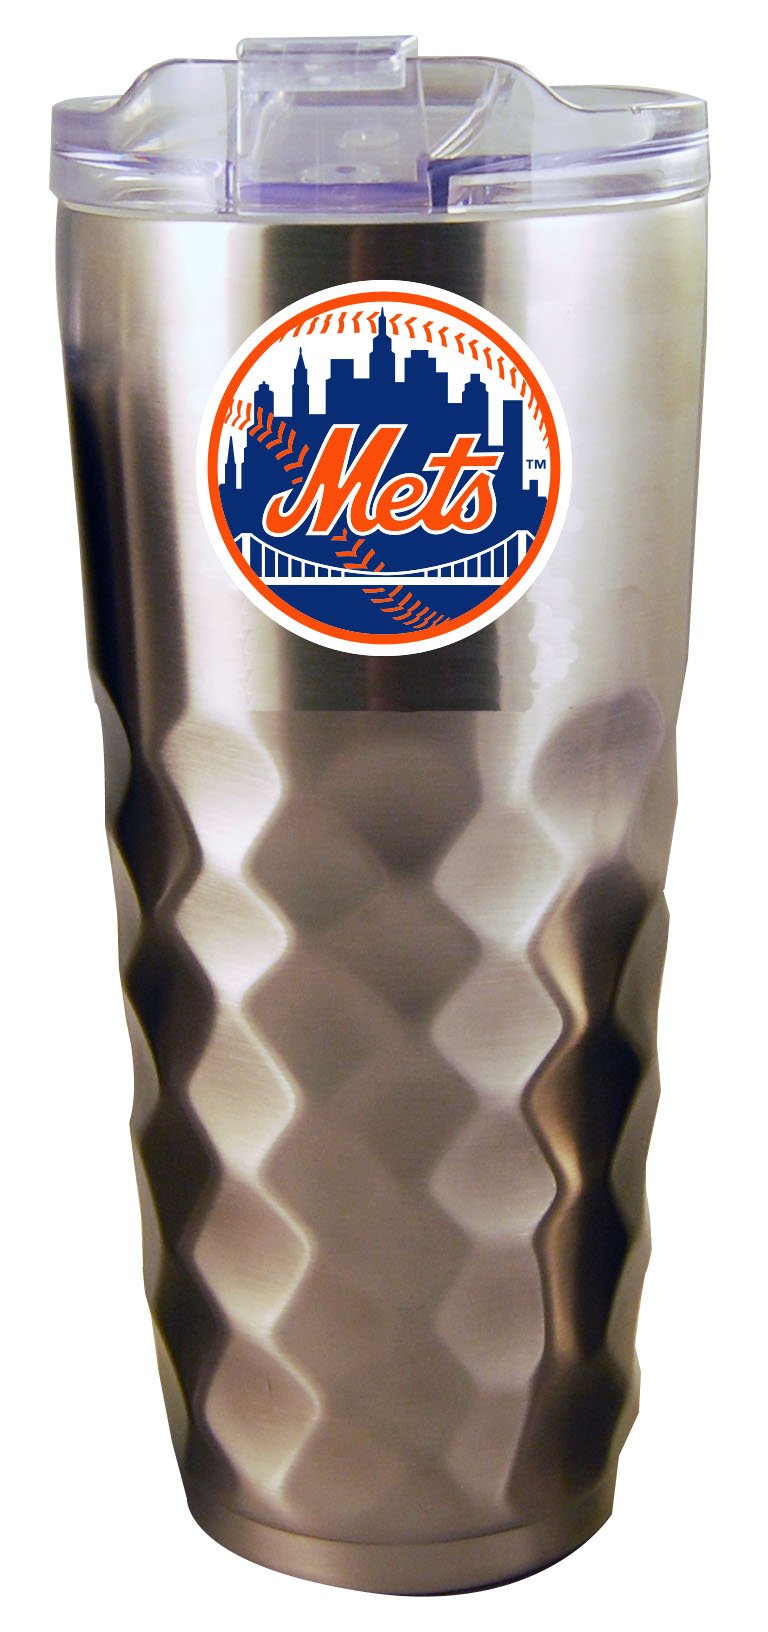 32OZ SS DIAMD TMBLR METS
CurrentProduct, Drinkware_category_All, MLB, New York Mets, NYM
The Memory Company